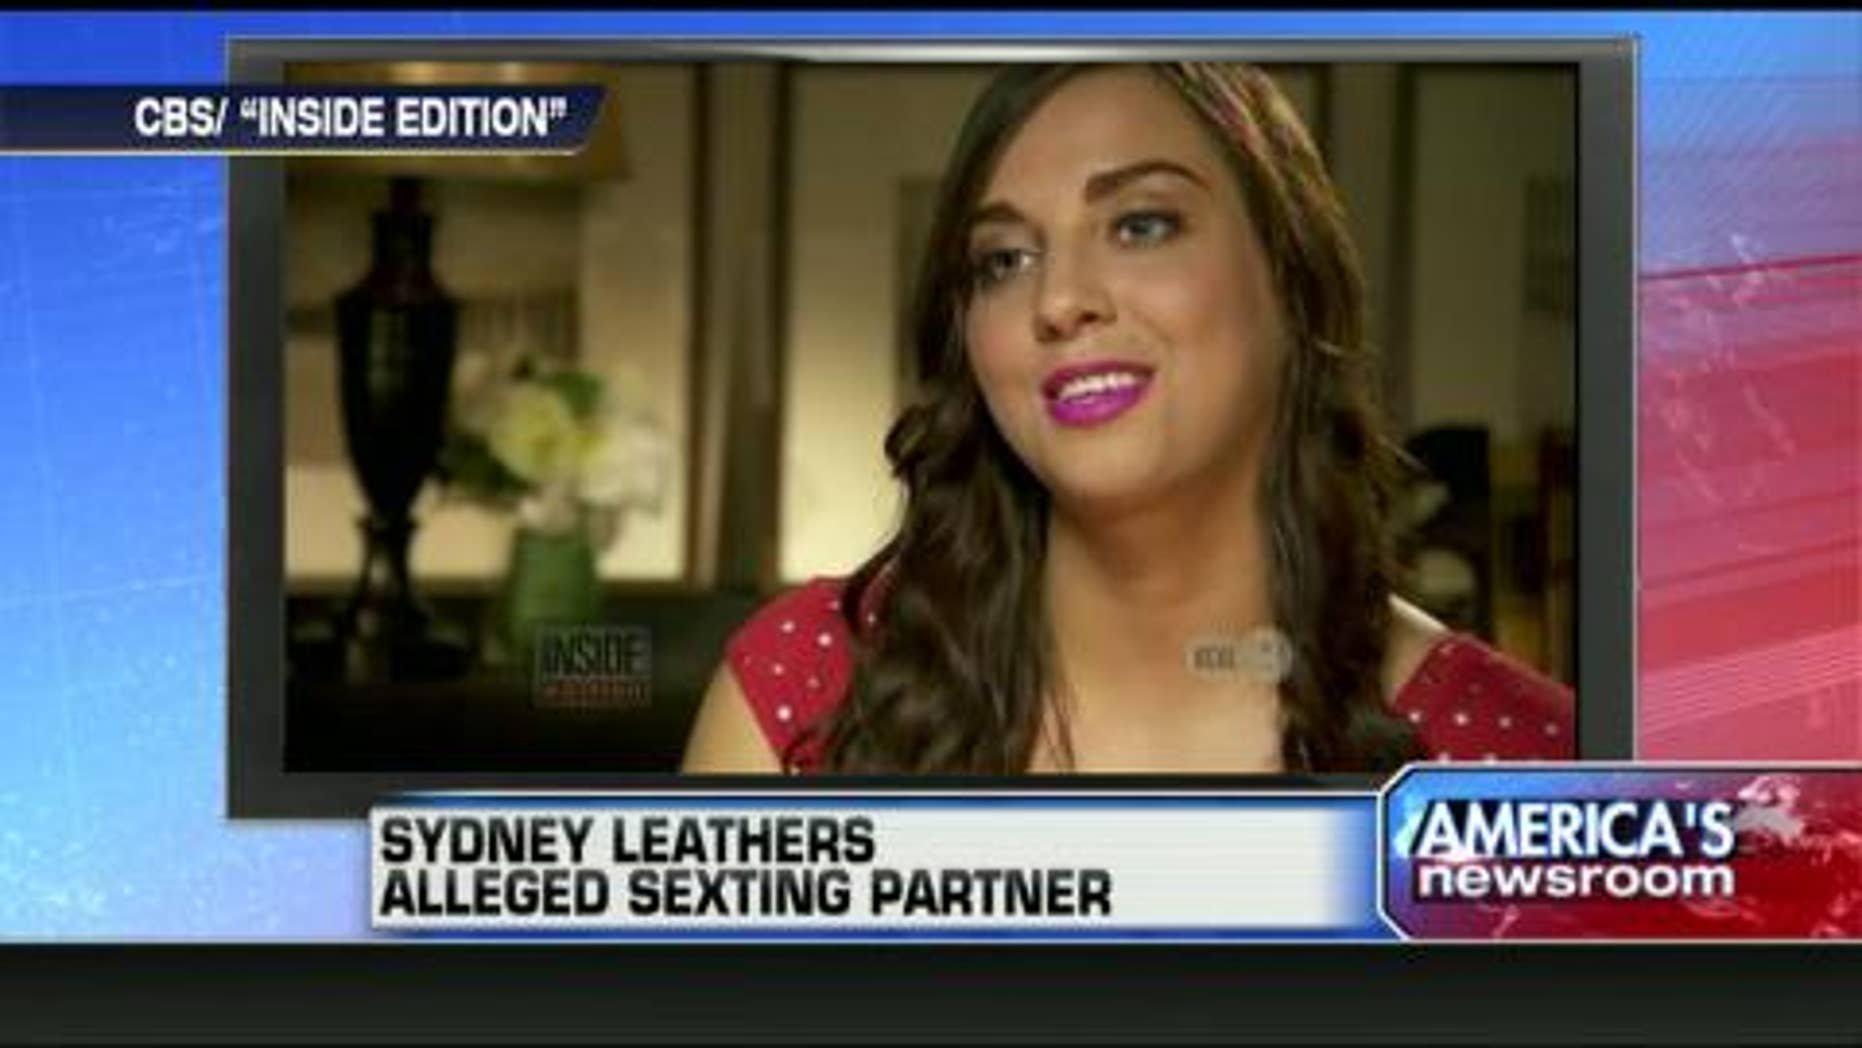 Duke Porn Star Belle Knox Gets Sex Scandal Advice From Sydney Leathers Fox News 8919